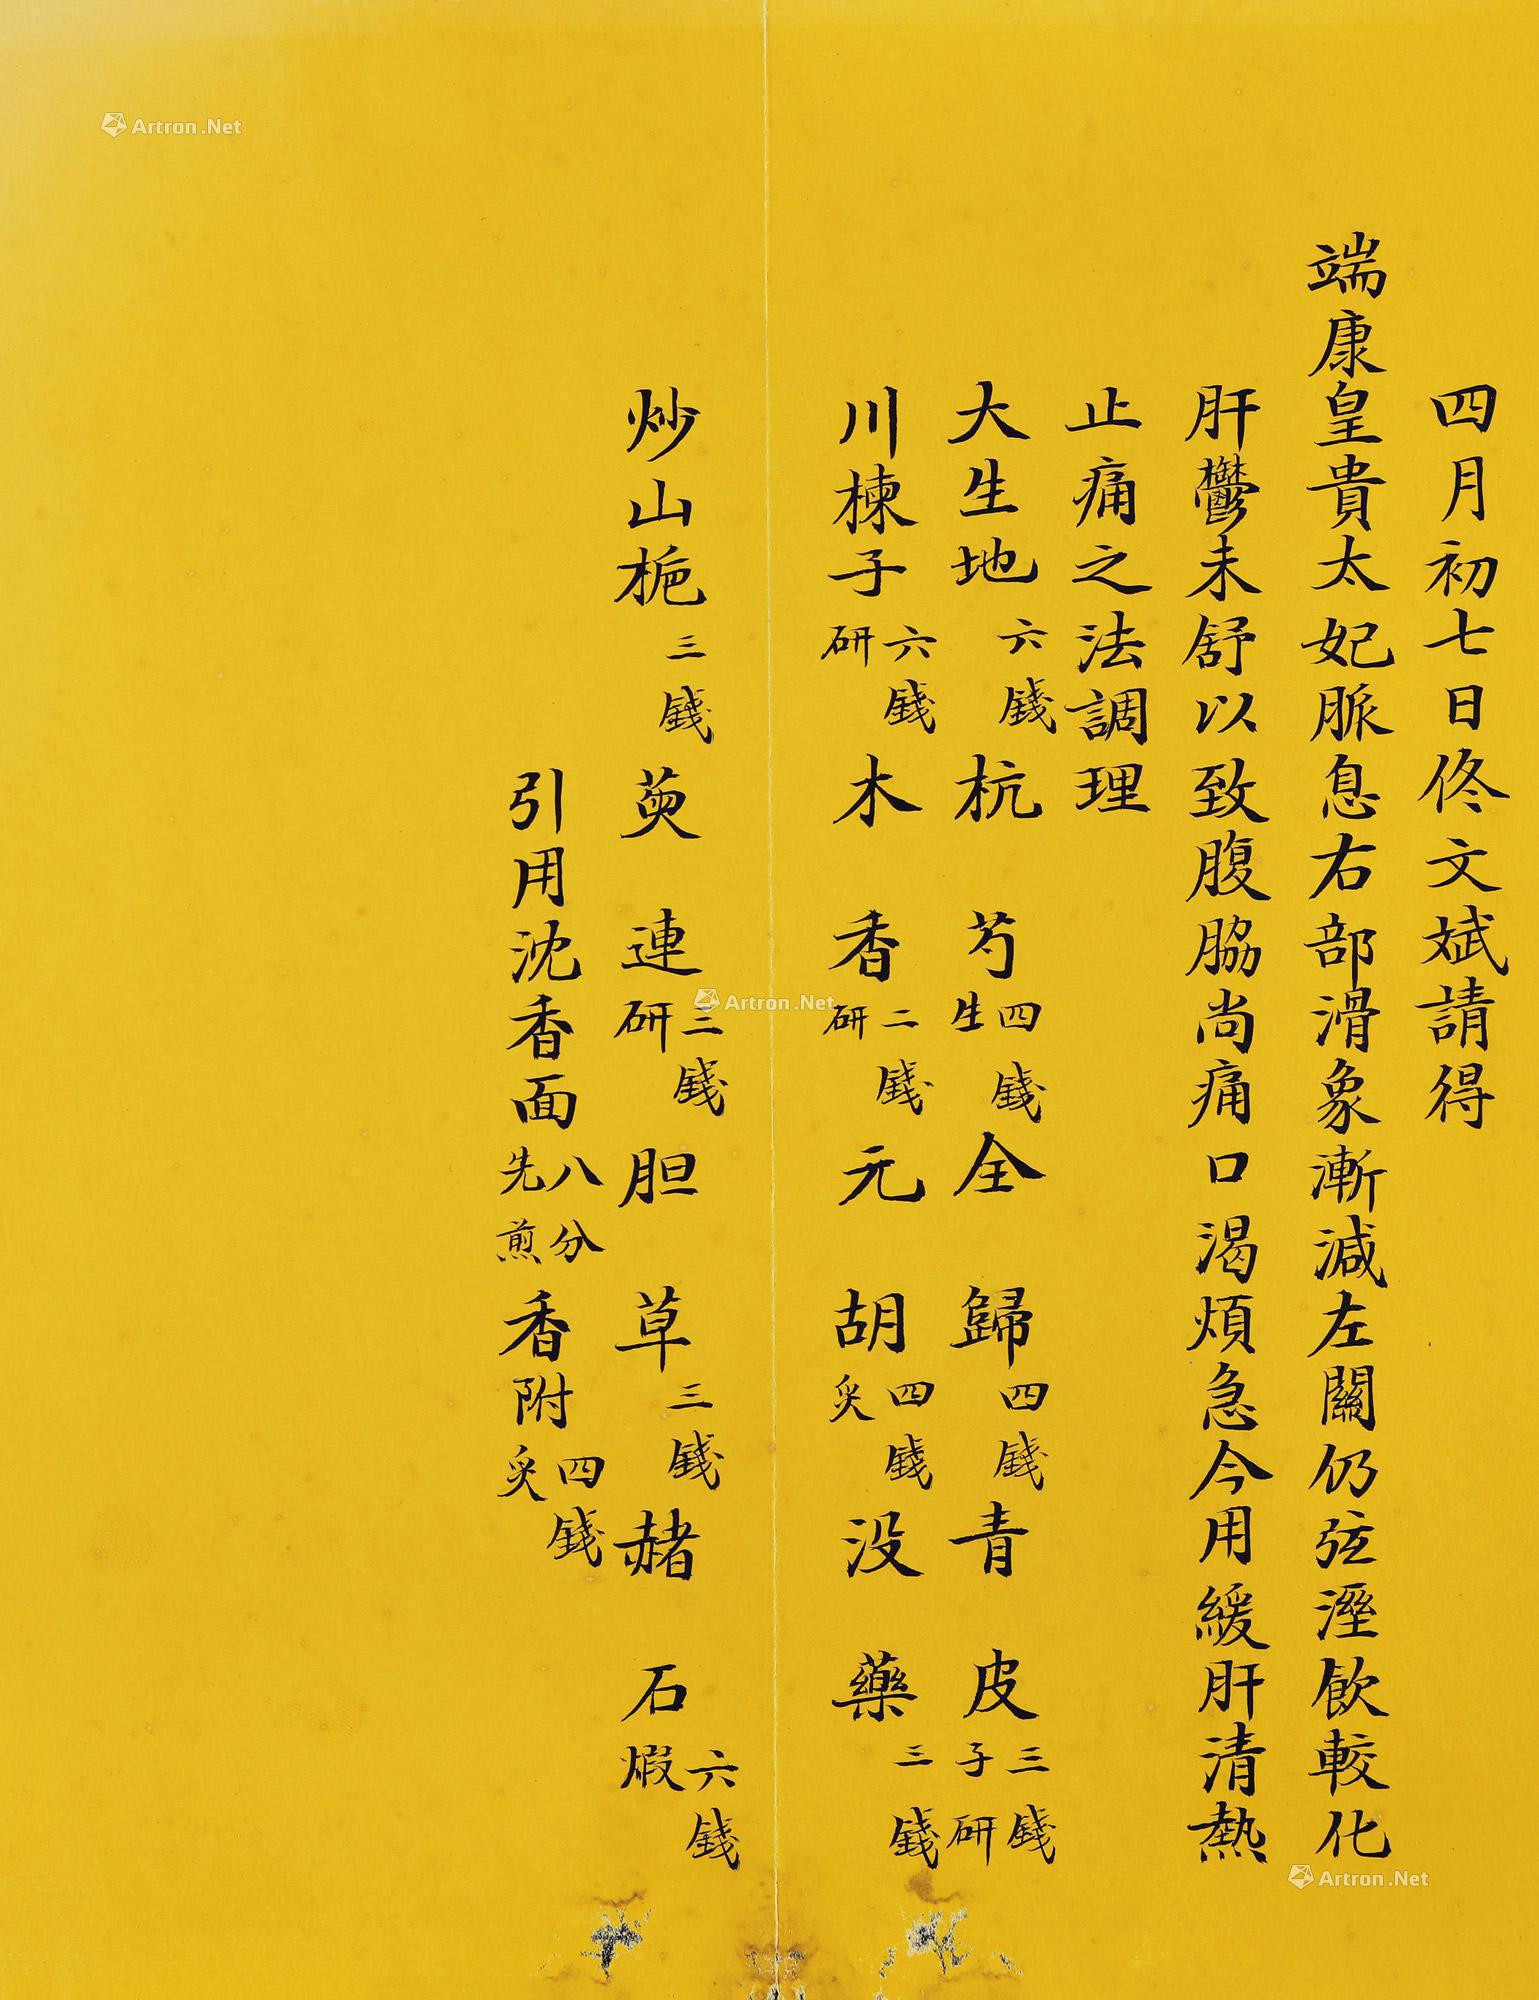 Tong Wenbin， the official physician of the former Imperial Hospital of Qing Dynasty， is the prescription for the pulse diagnosis of Duan Kang Emperor and Gui Taifei.